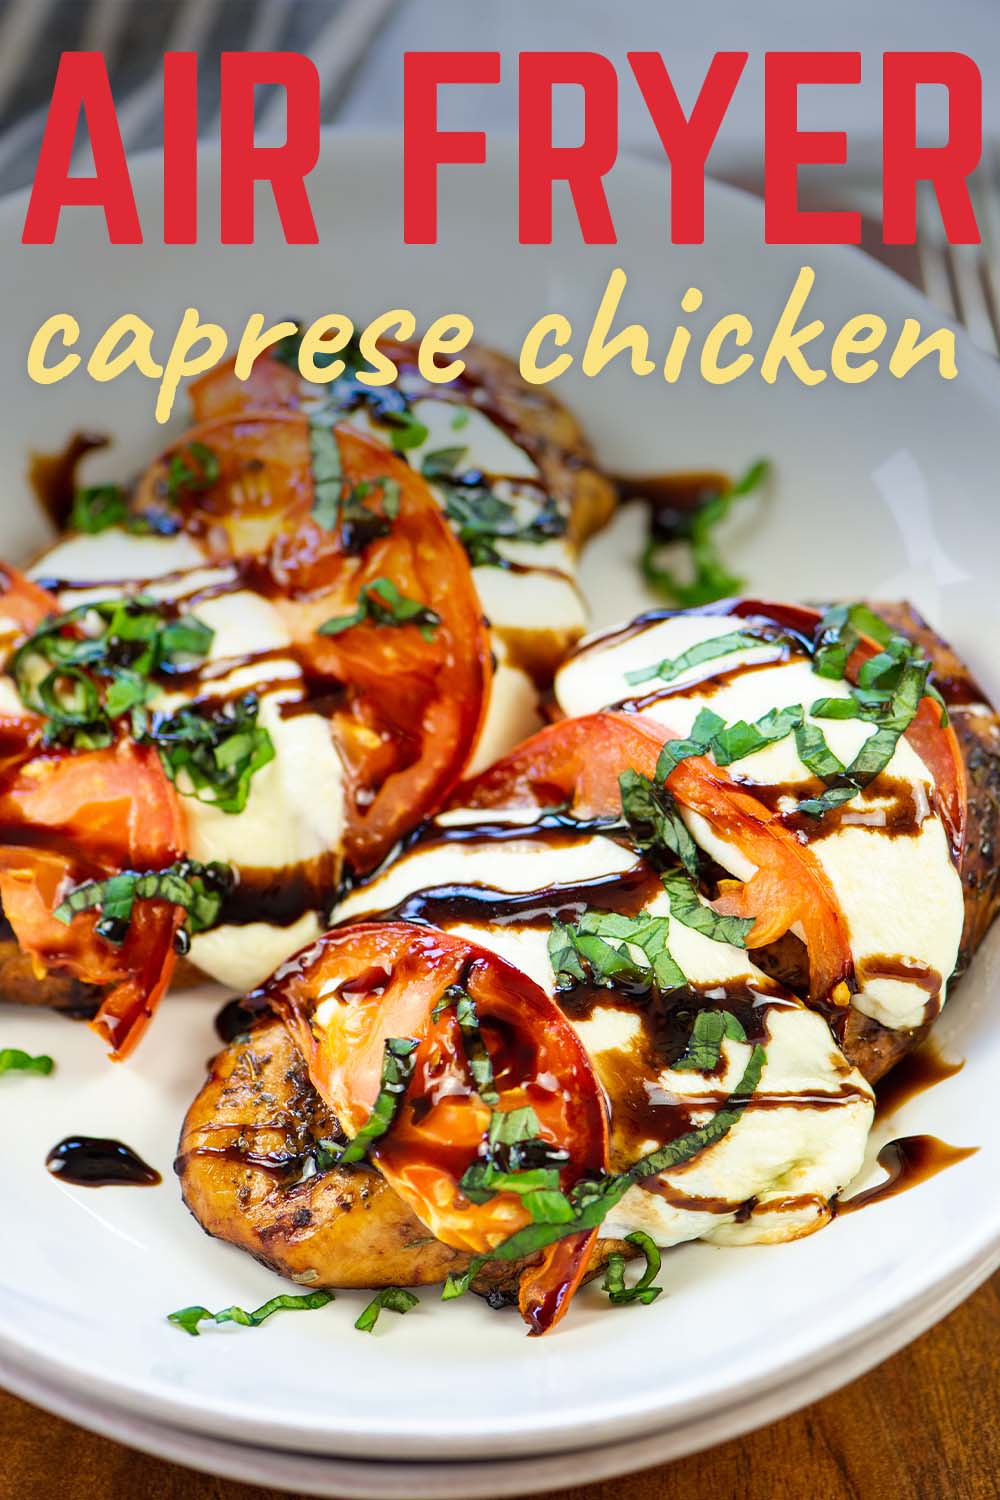 This chicken caprese is nice and tender, and the fresh toppings make the dish wonderful!